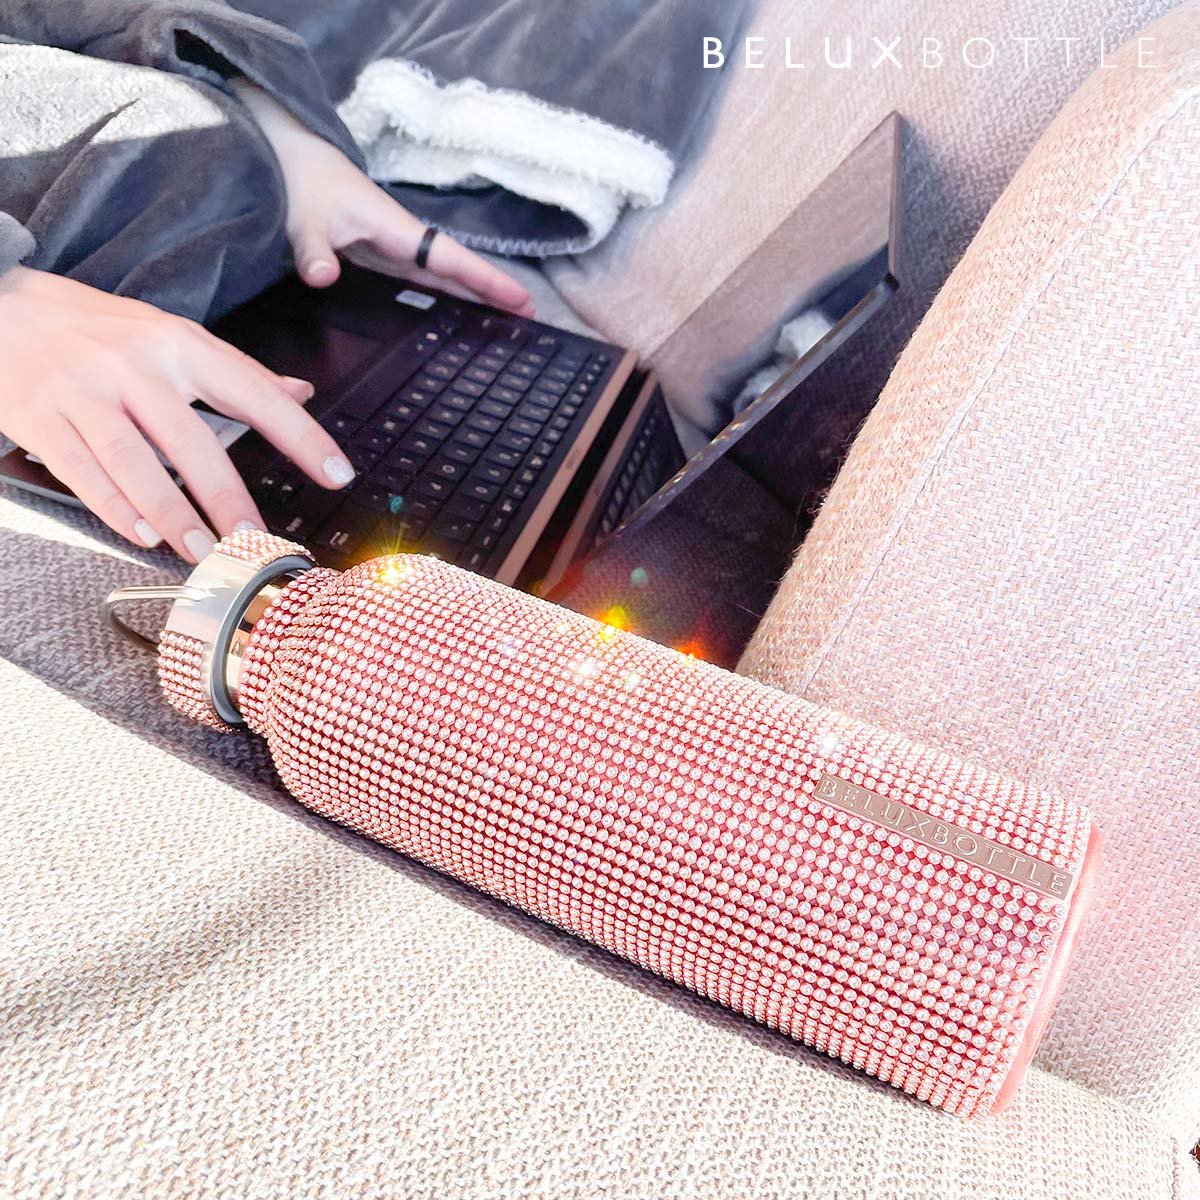 Rose Gold Sparkly Bling Bottle on beige couch, a girl working with laptop